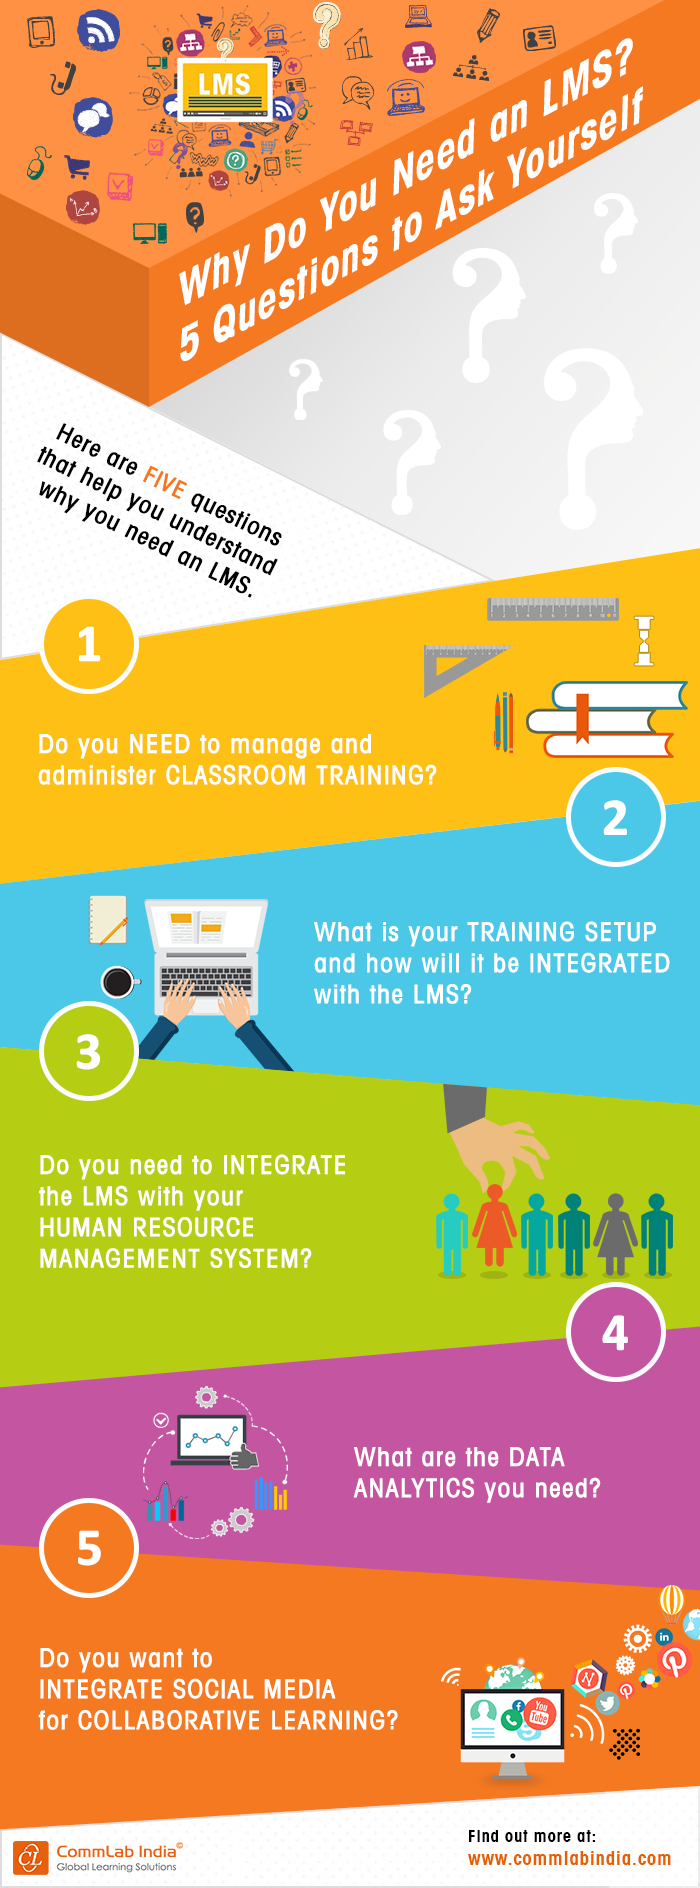 Why Do You Need an LMS? 5 Questions to Ask Yourself [Infographic]